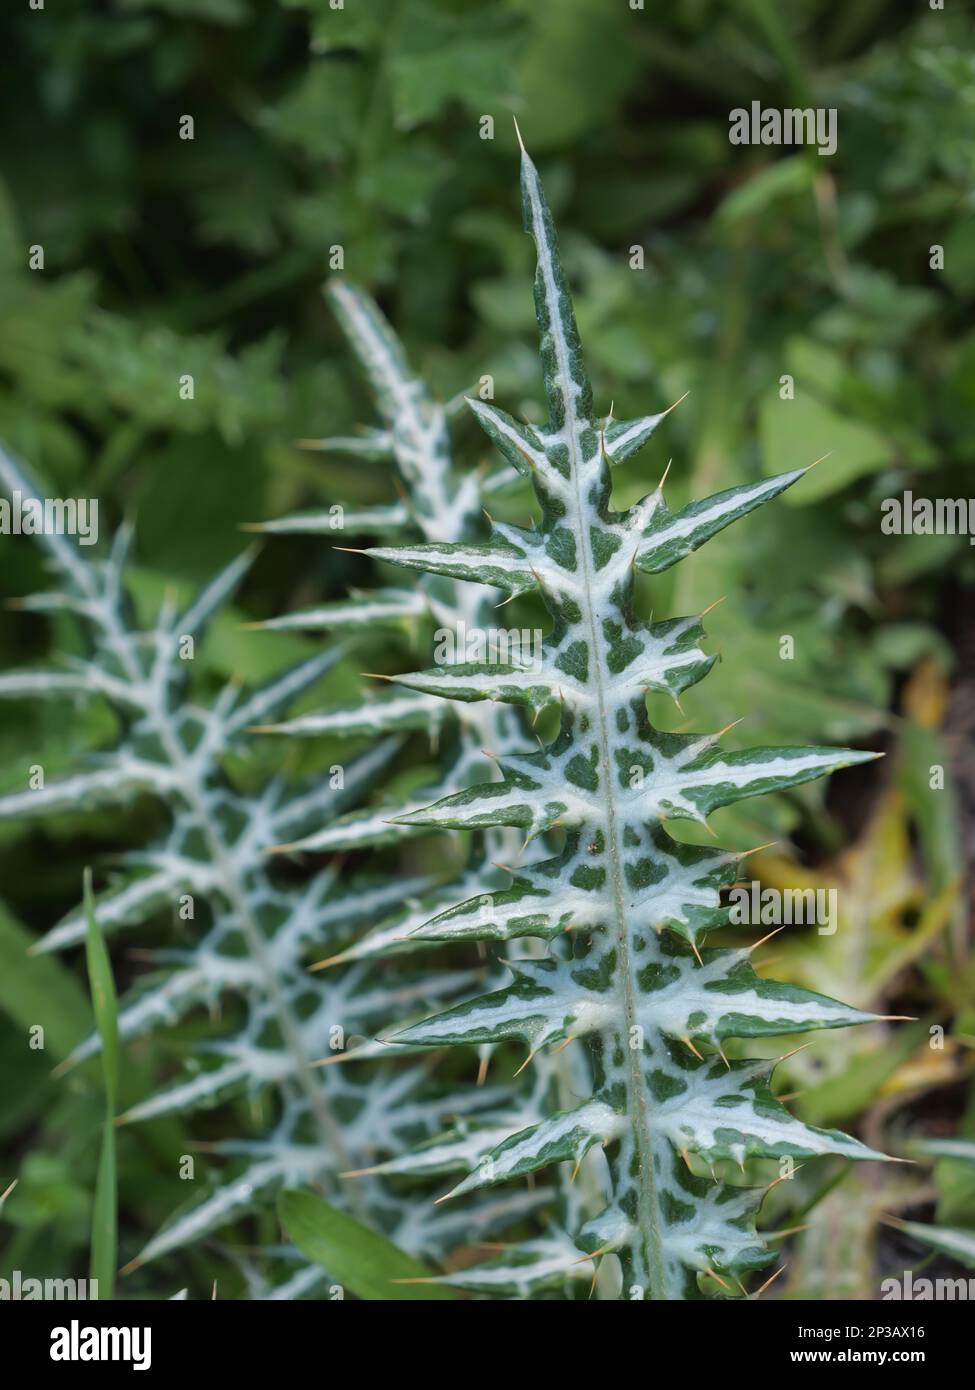 the prickly beautiful plant in nature Stock Photo